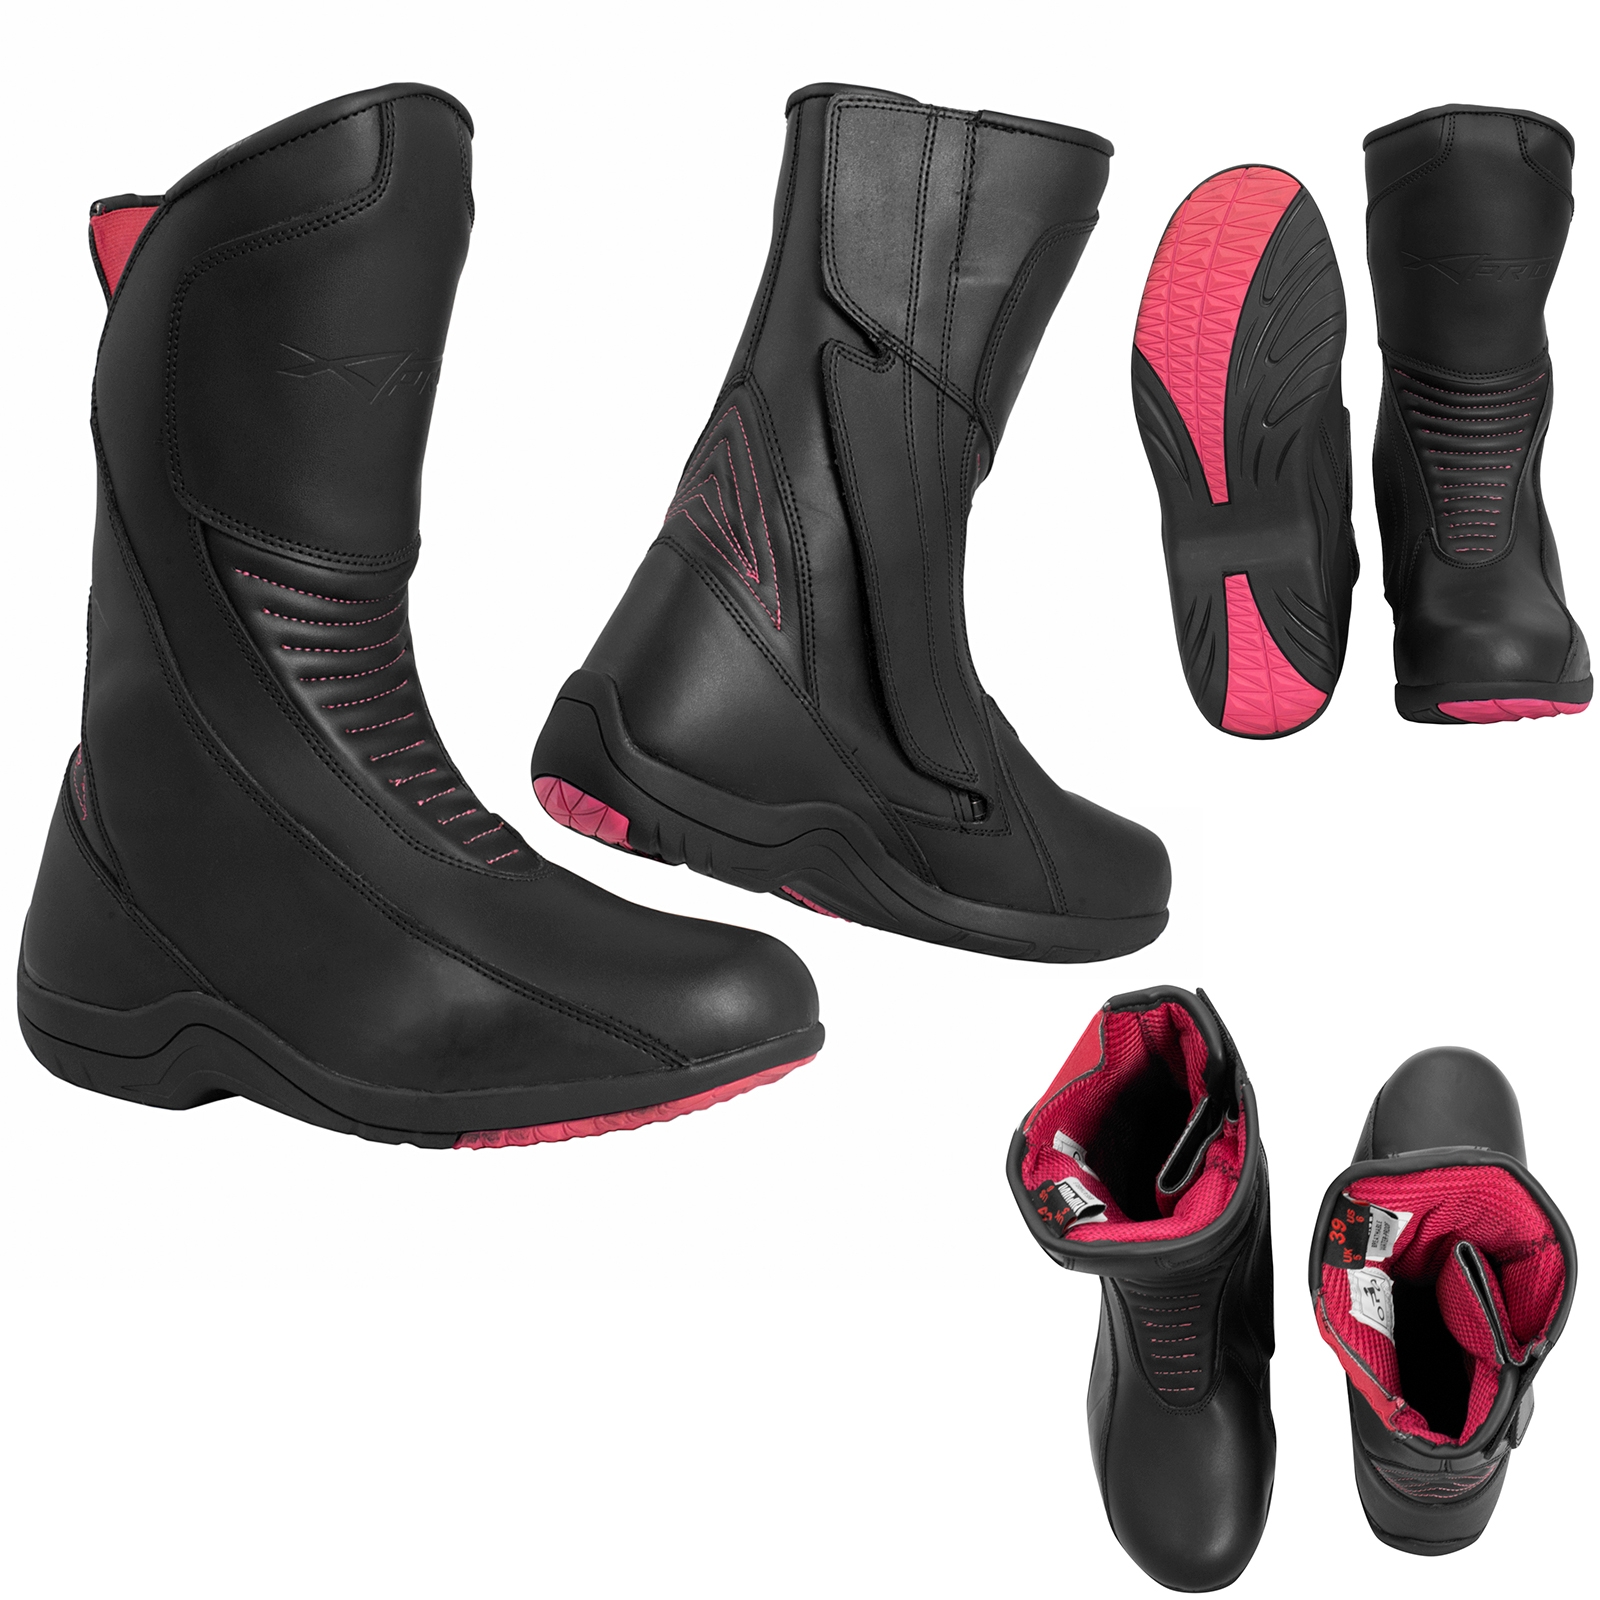 RH TOURING WATERPROOF LEATHER BOOTS MOTORCYCLE MOTORBIKE ALL SIZES